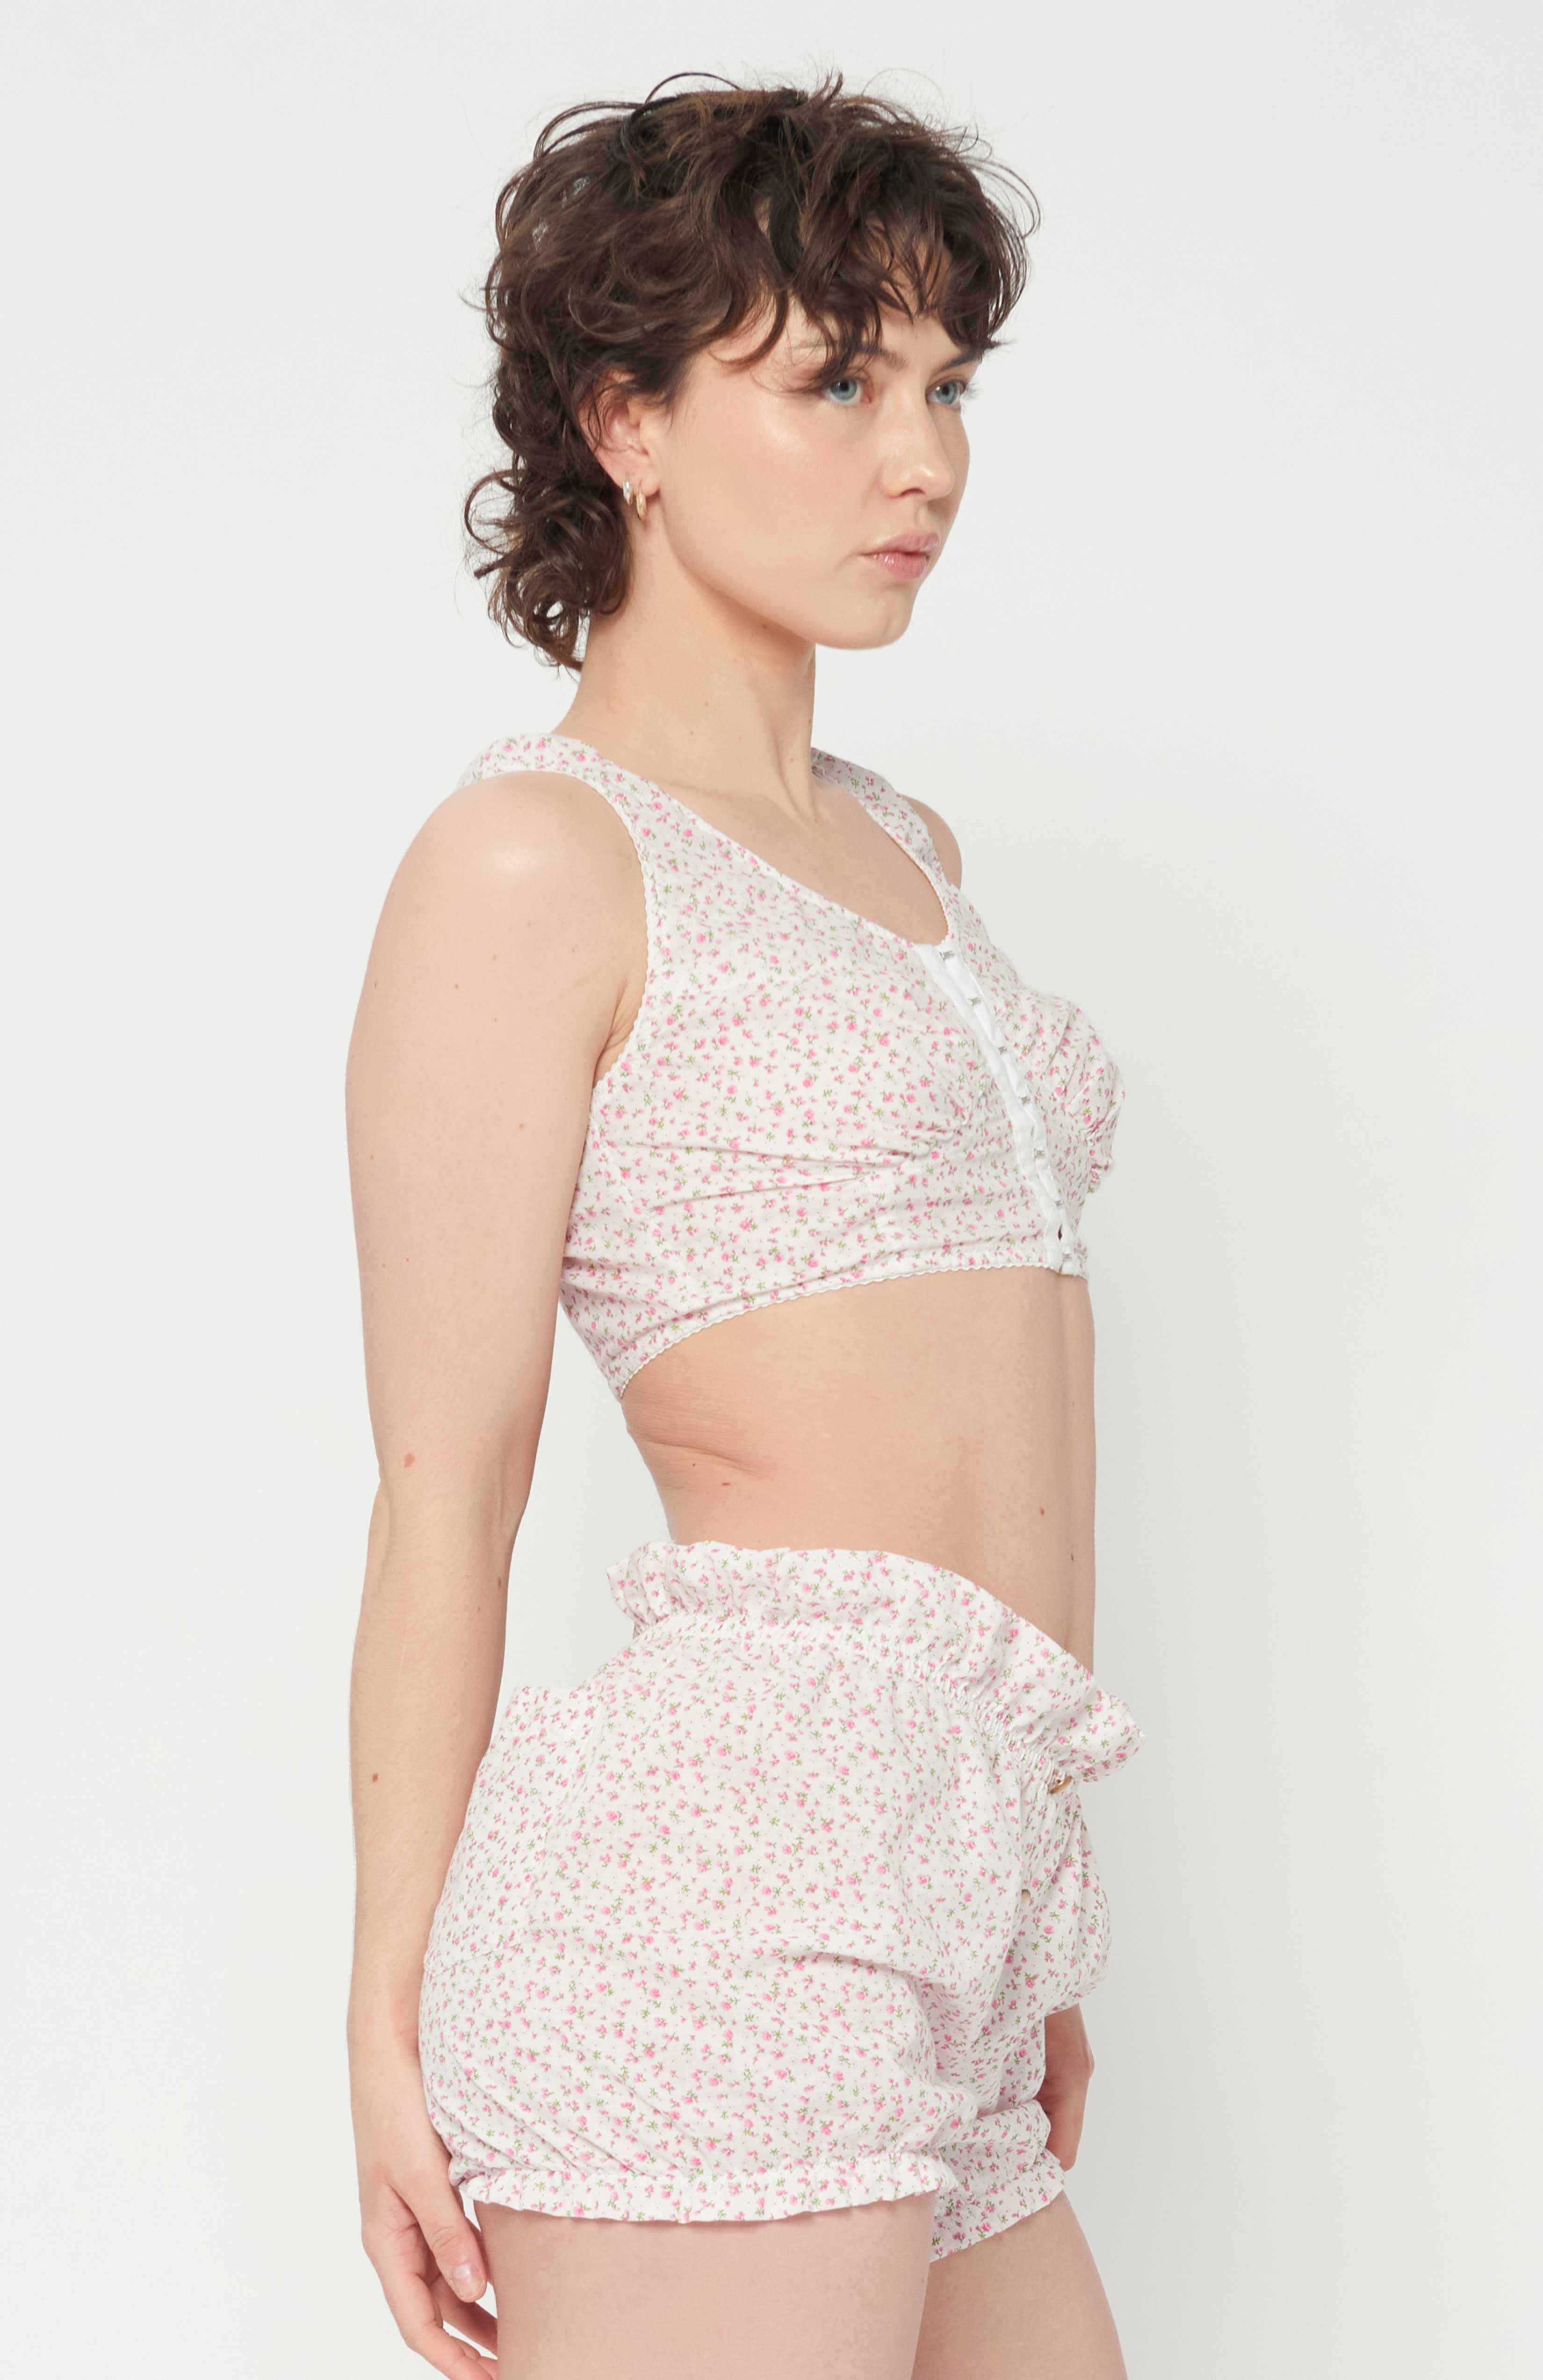 Maroske Peech playful cropped white floral bustier is an updated classic of an era gone by. The bust-line gathers facilitates and creates a feminine shape. Features scalloped lace elastic finishings, a tidy hook and eye centre front closure finishes off the sweatheart neckline.